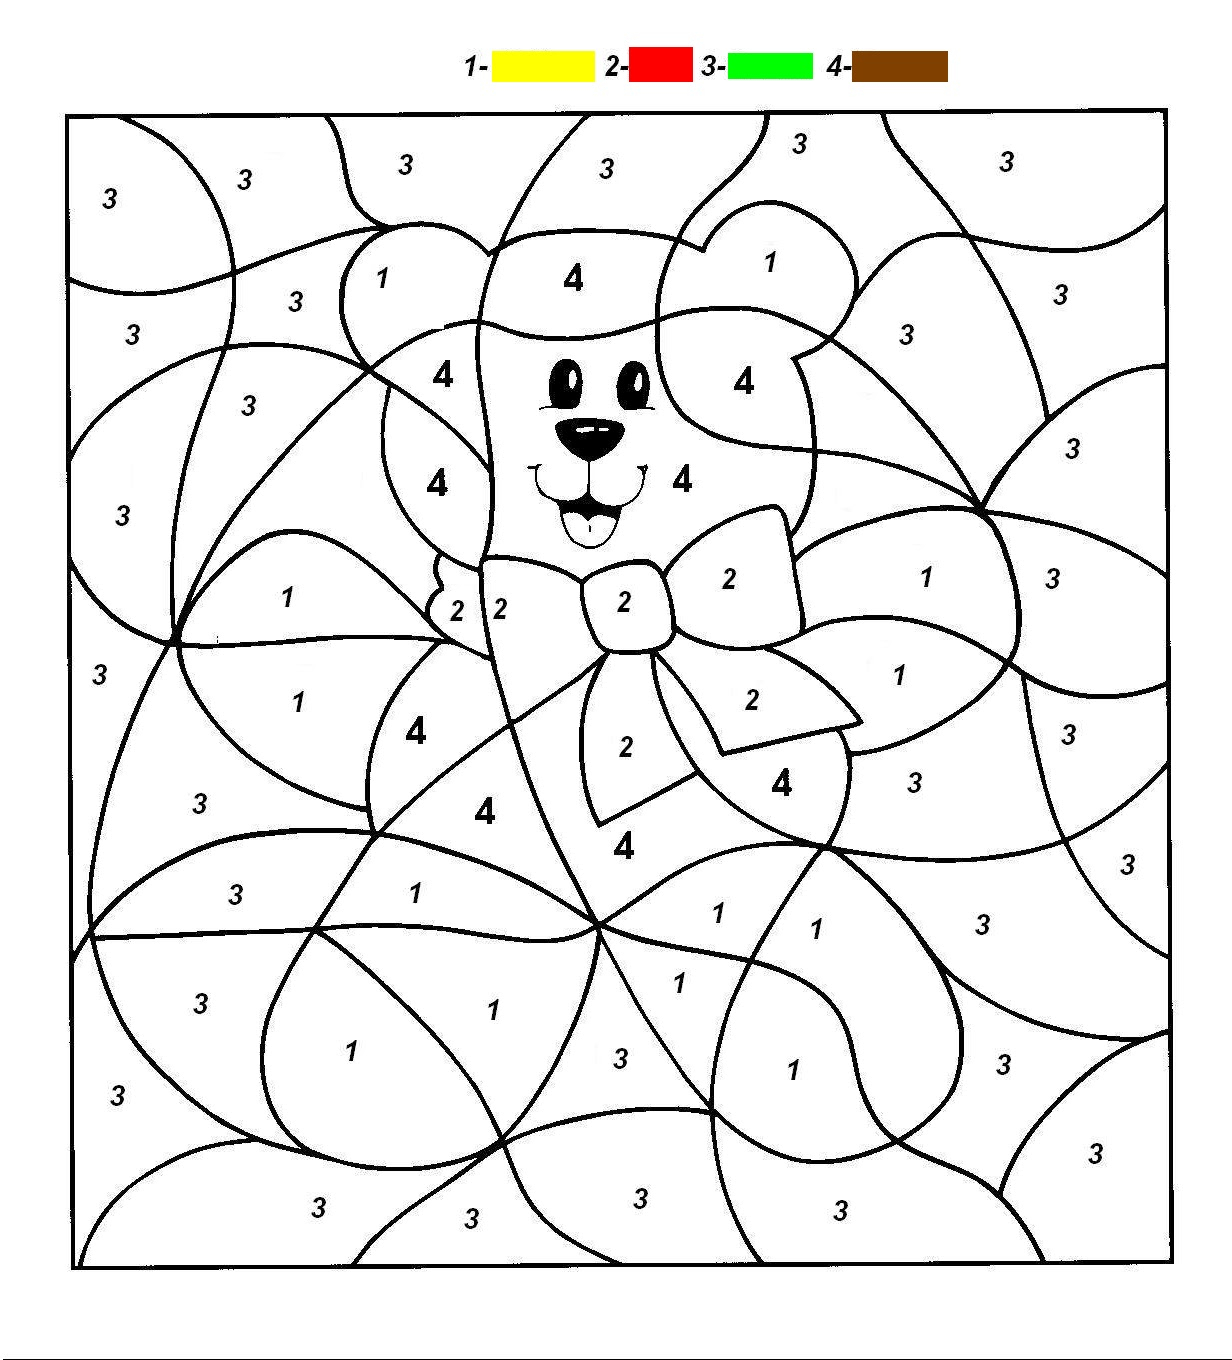 27-inspiration-image-of-printable-number-coloring-pages-albanysinsanity